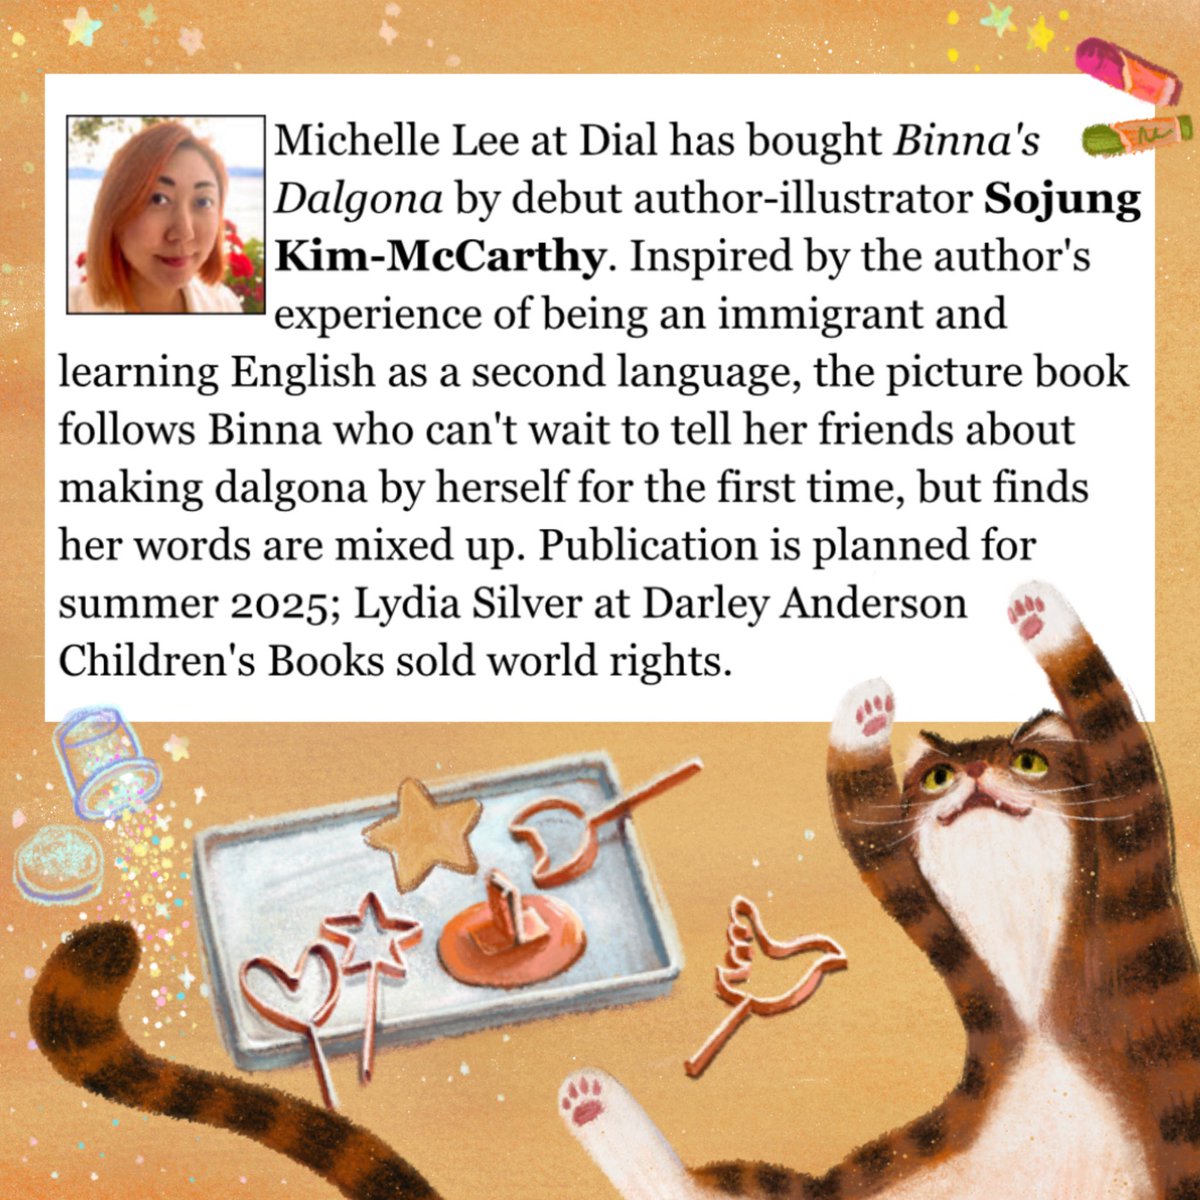 It’s official 🥳 My author-illustrator debut picture book will be out in summer 2025! Super excited to be working with the amazing team at Dial Books for Young Readers, and a million thanks as always to my wonderful agent @LydiaRSilver for making it happen!!